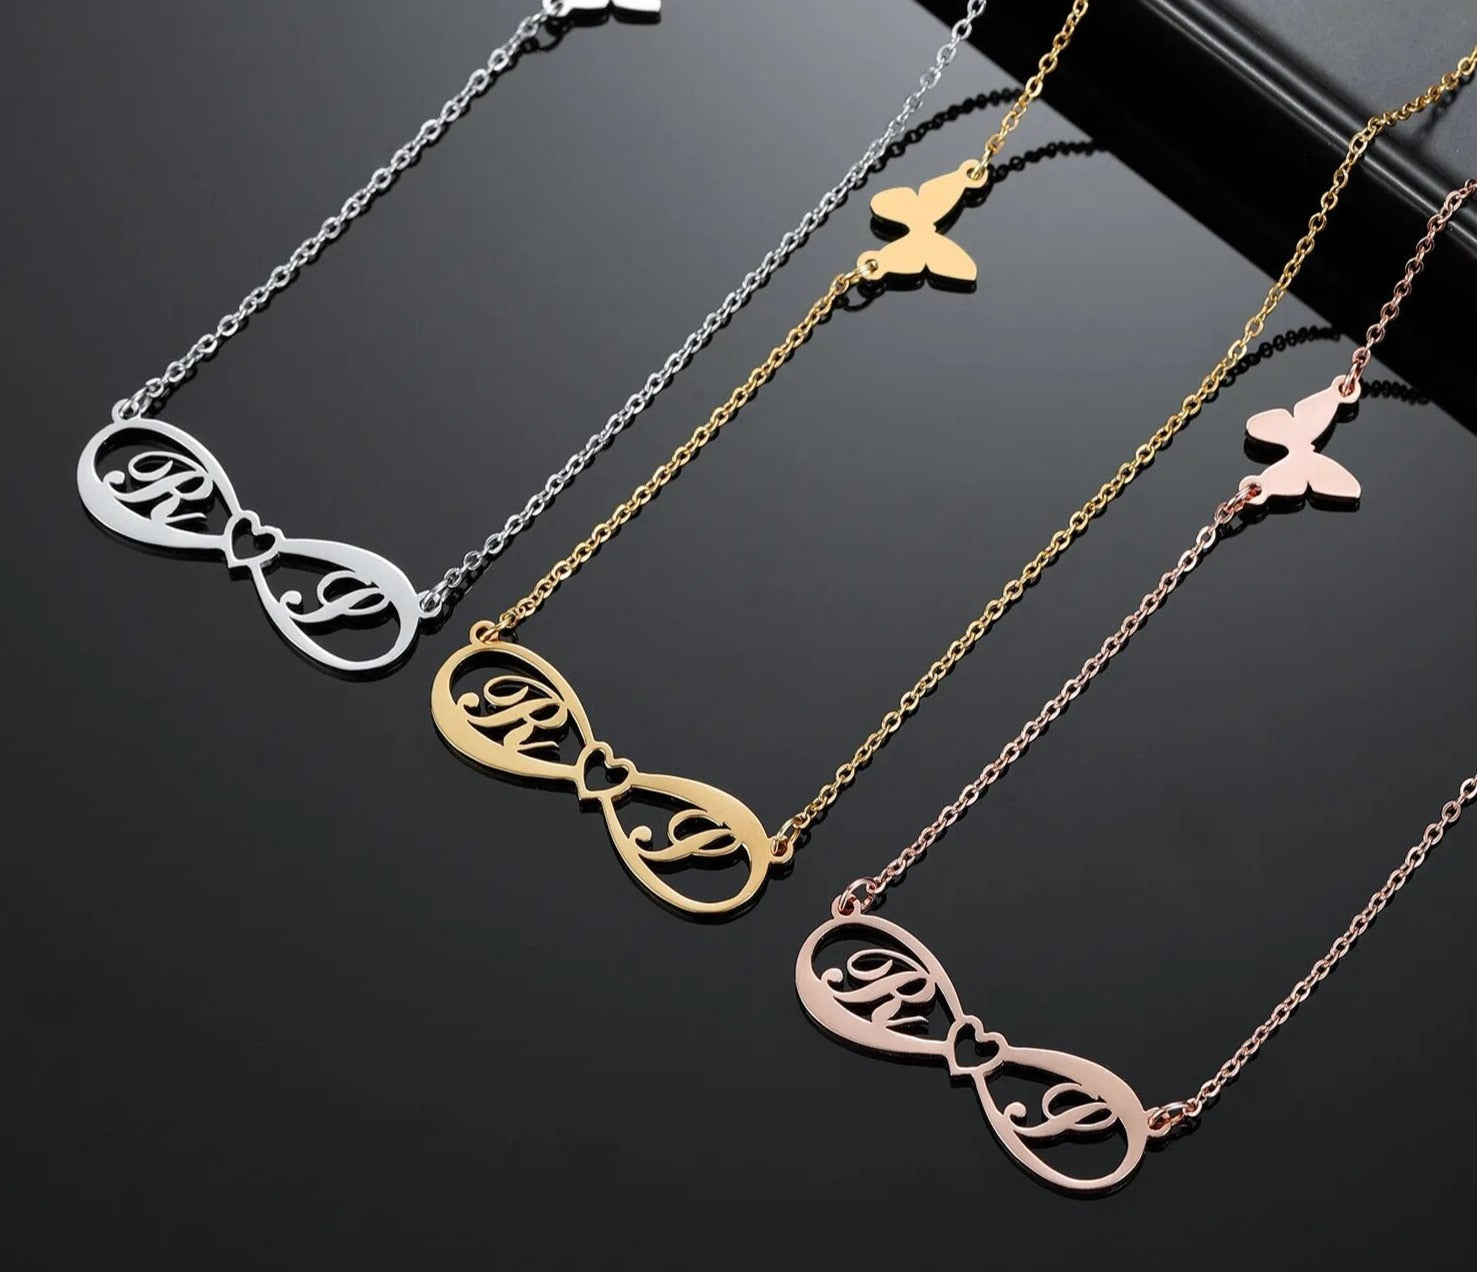 Personalized Infinity Name Necklace with Butterfly Pendant